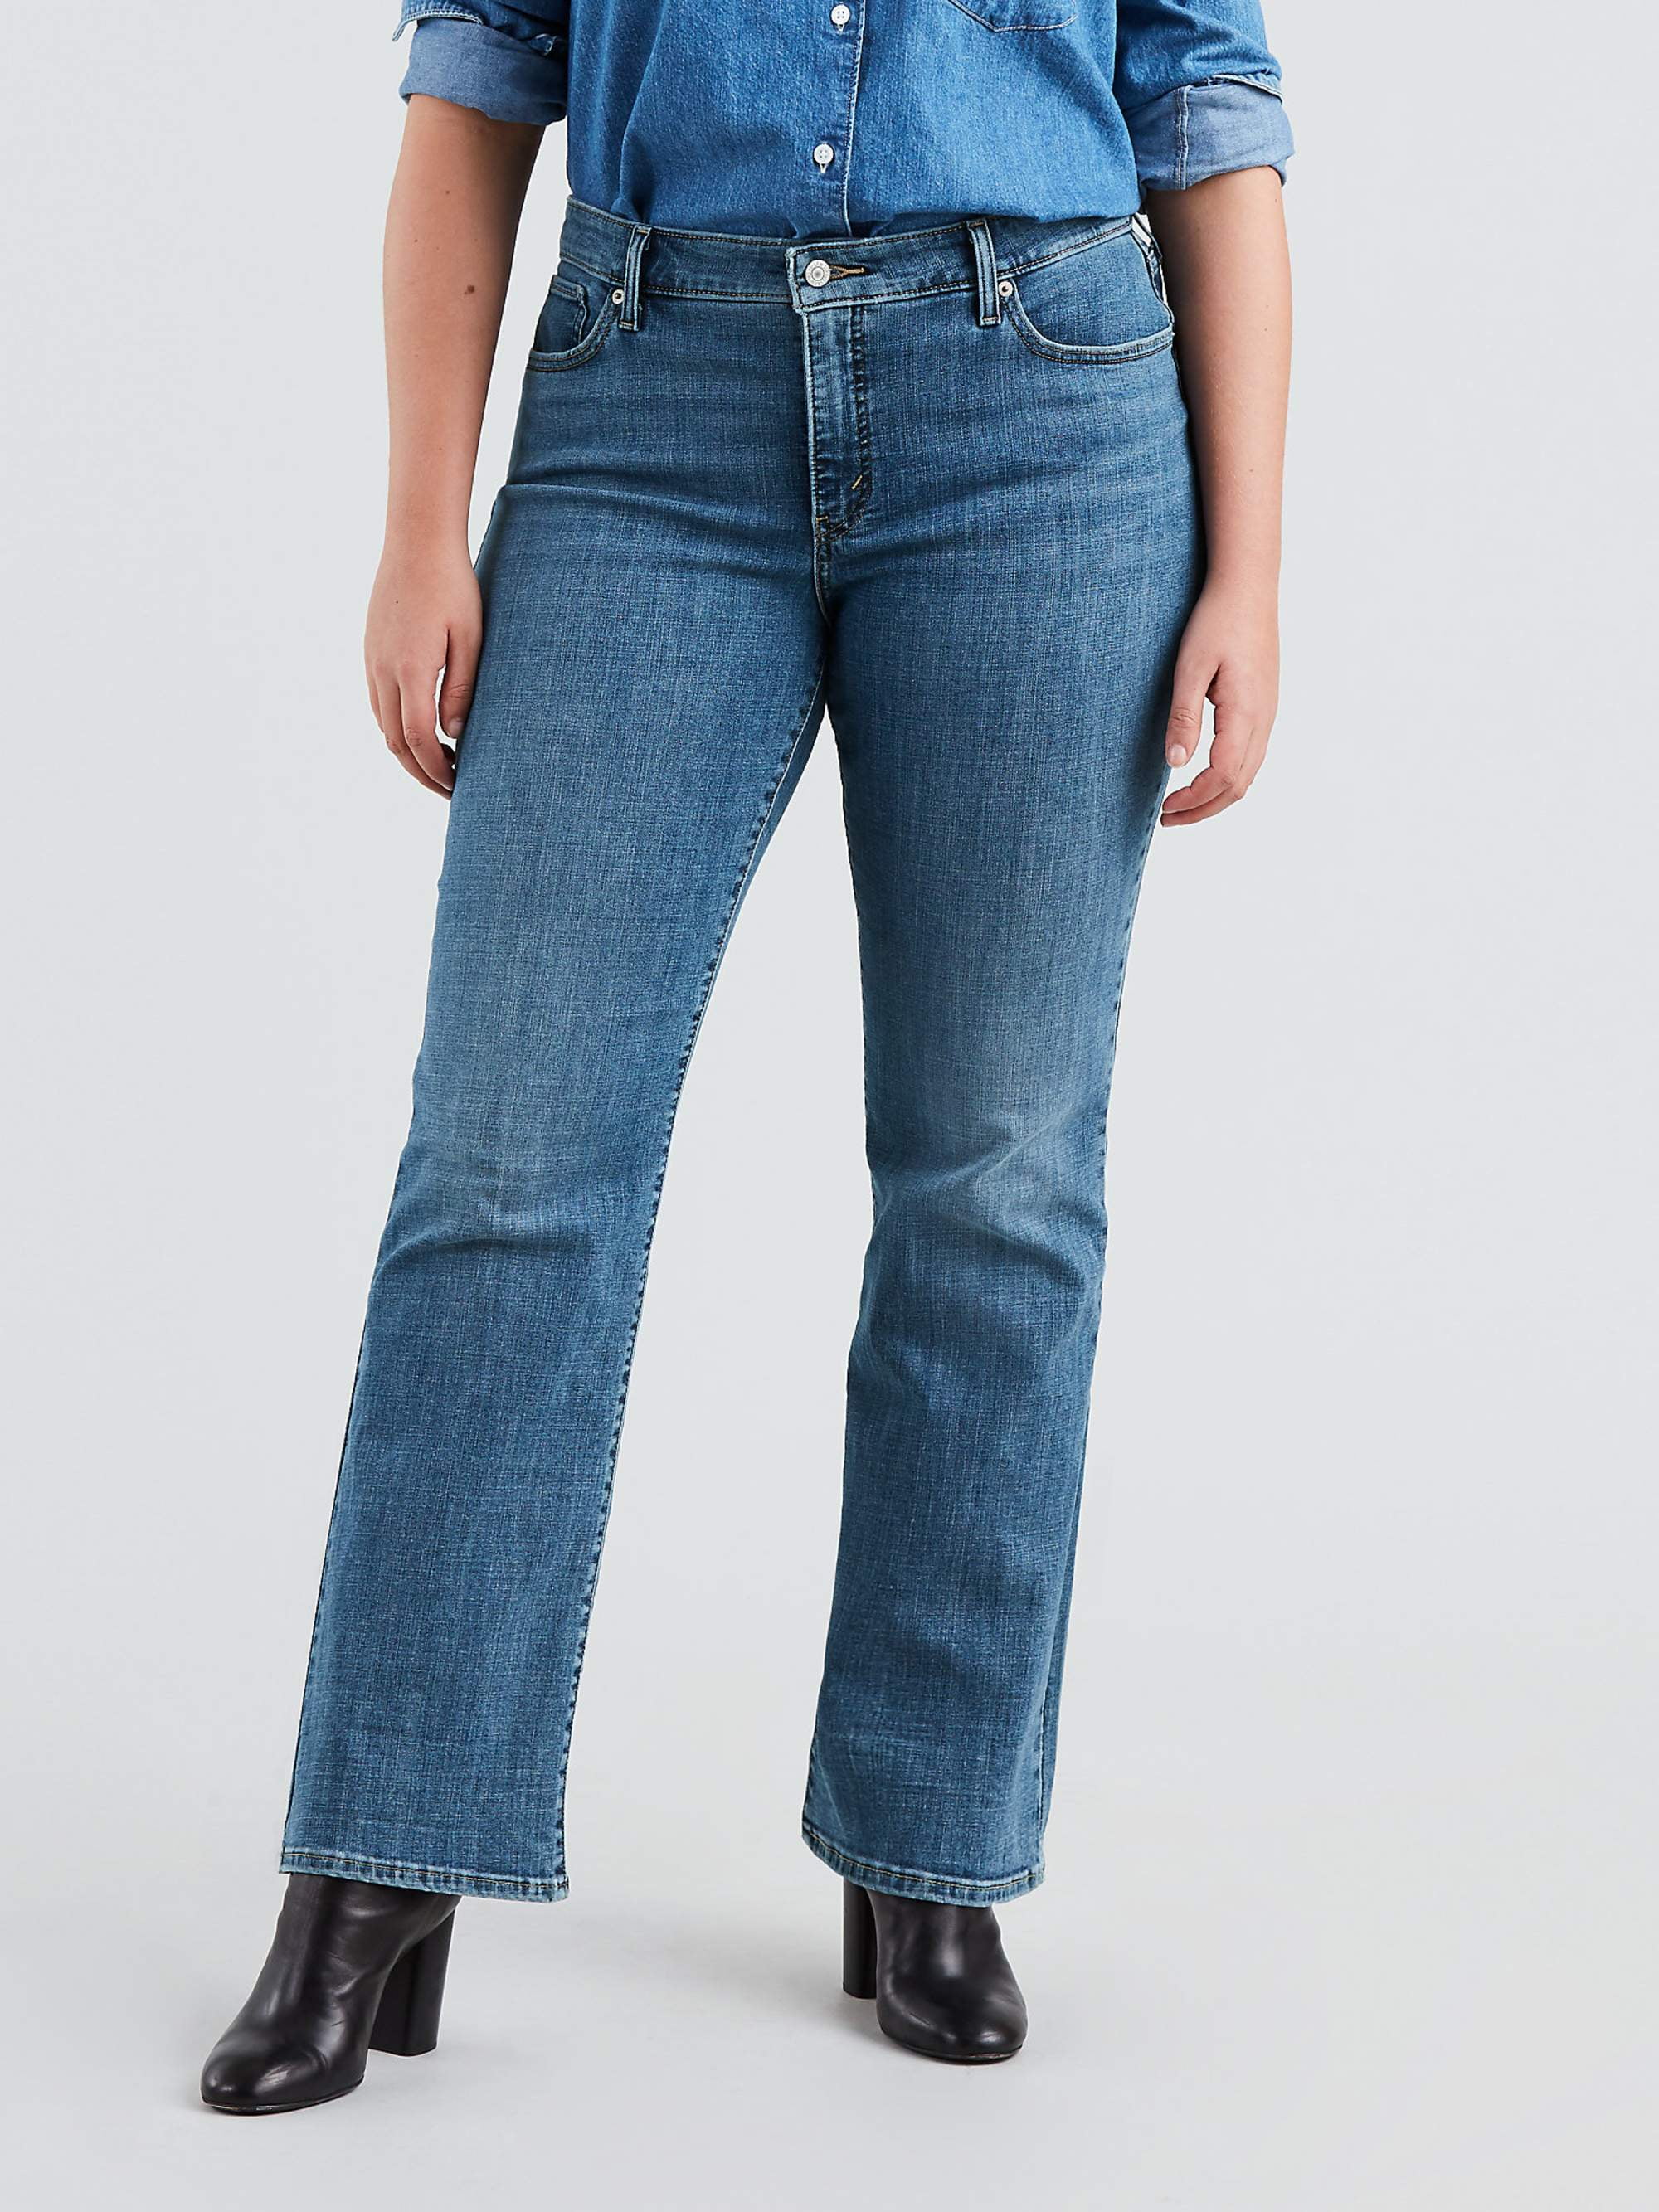 women's levi's 415 relaxed bootcut jeans